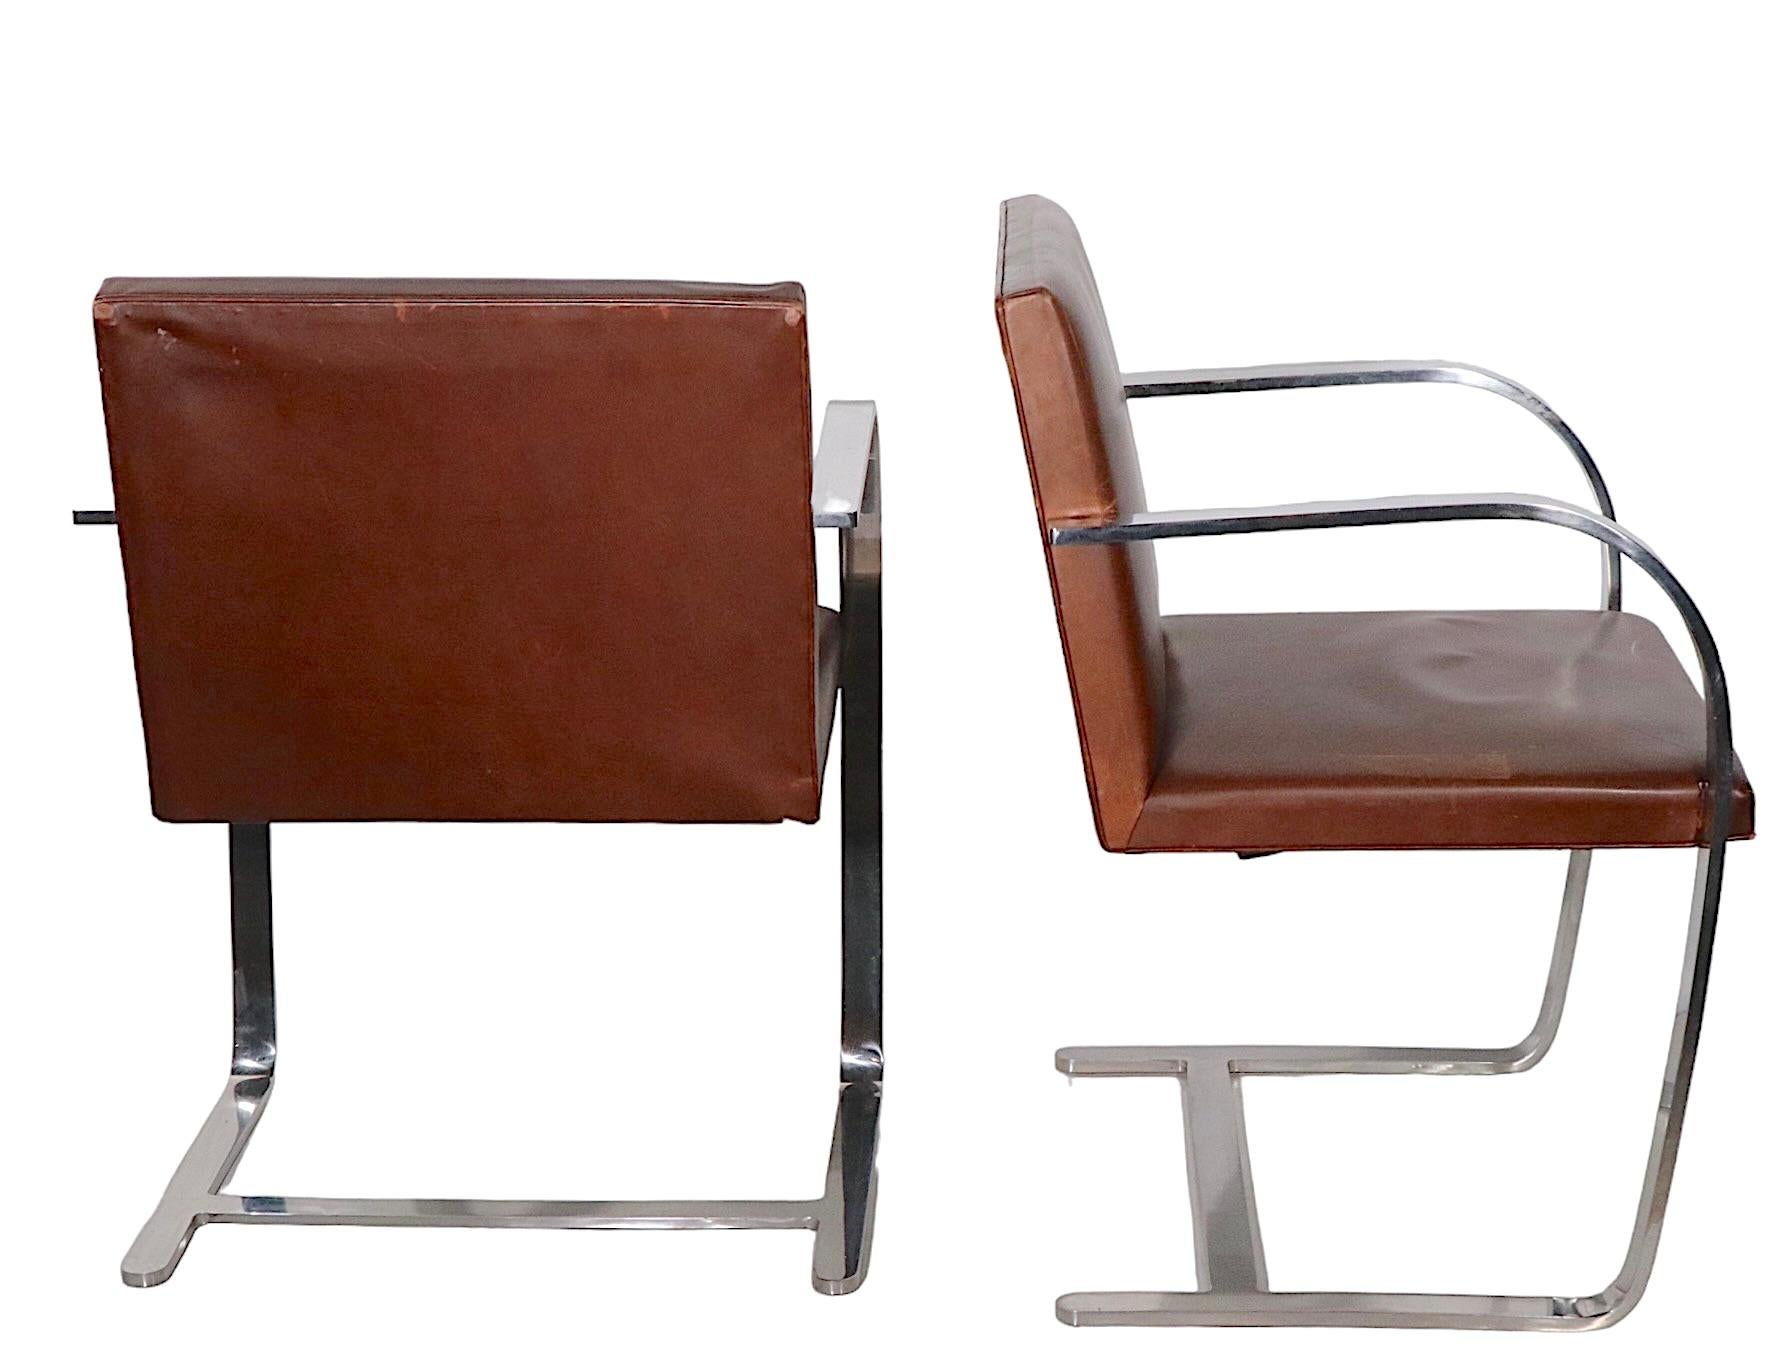 American Pr. Meis Van Der Rohe Designed Brno Chairs by Knoll in Brown Leather